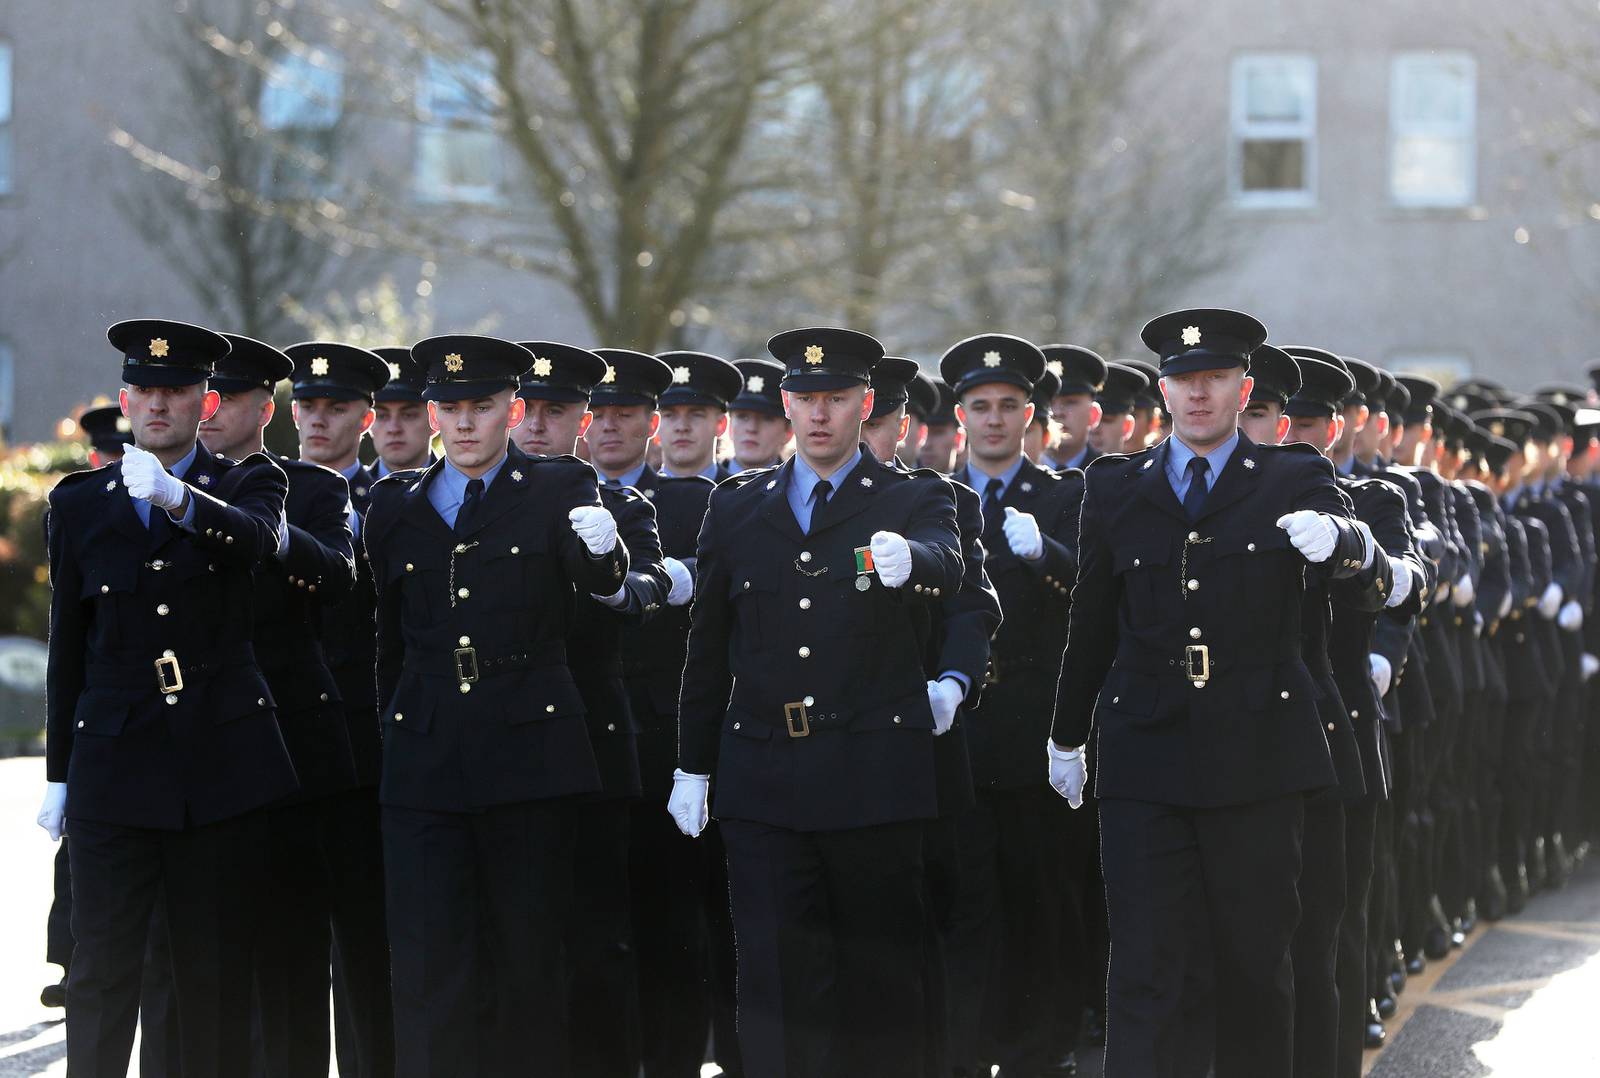 Gardai graduates during the Passing Out ceremony at Garda College, Templemore, Co. Tipperary. PRESS ASSOCIATION Photo. Picture date: Friday November 29, 2019. See PA story POLICE Recruits Ireland. Photo credit should read: Brian Lawless/PA Wire